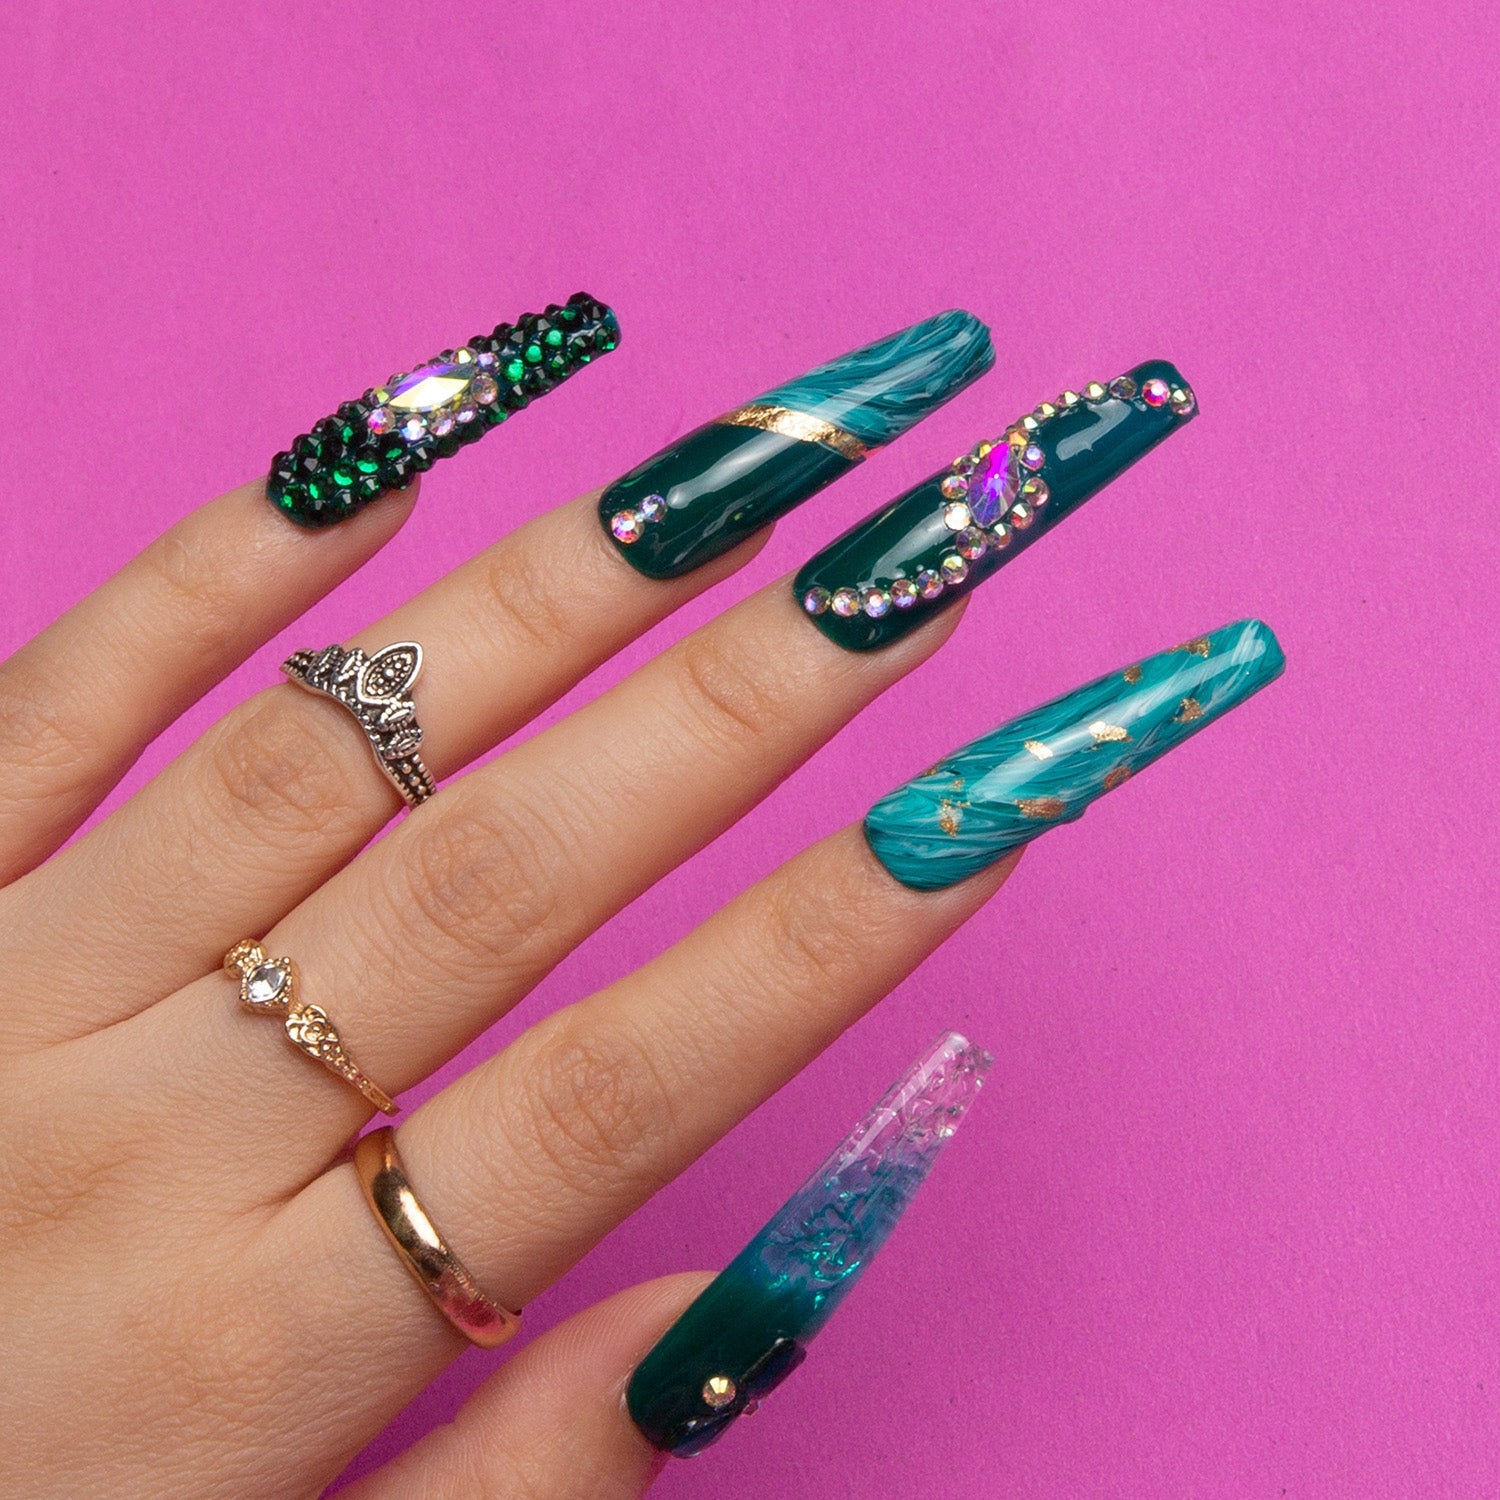 Hand showcasing Lovful's 'Emerald Envy' Coffin-shaped press-on nails with green designs, gold decor, and green rhinestones against a pink background.